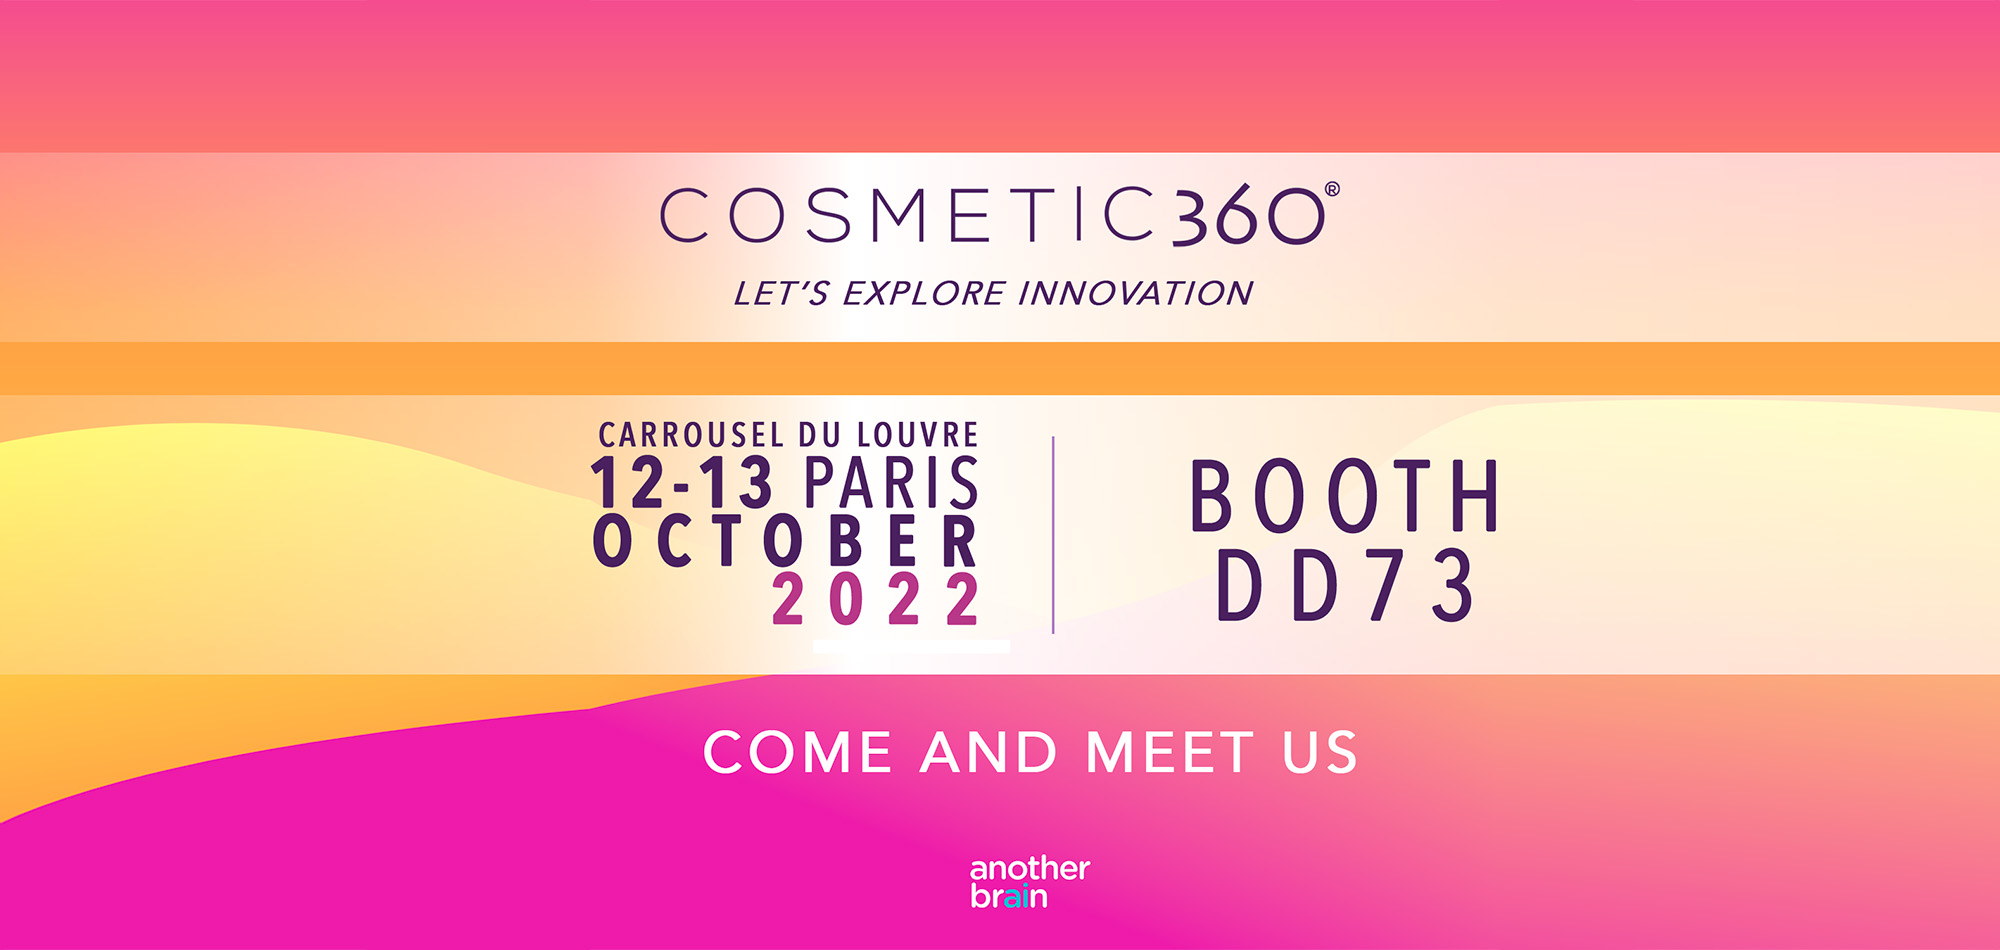 News tradeshow Cosmetic 360 - AnotherBrain